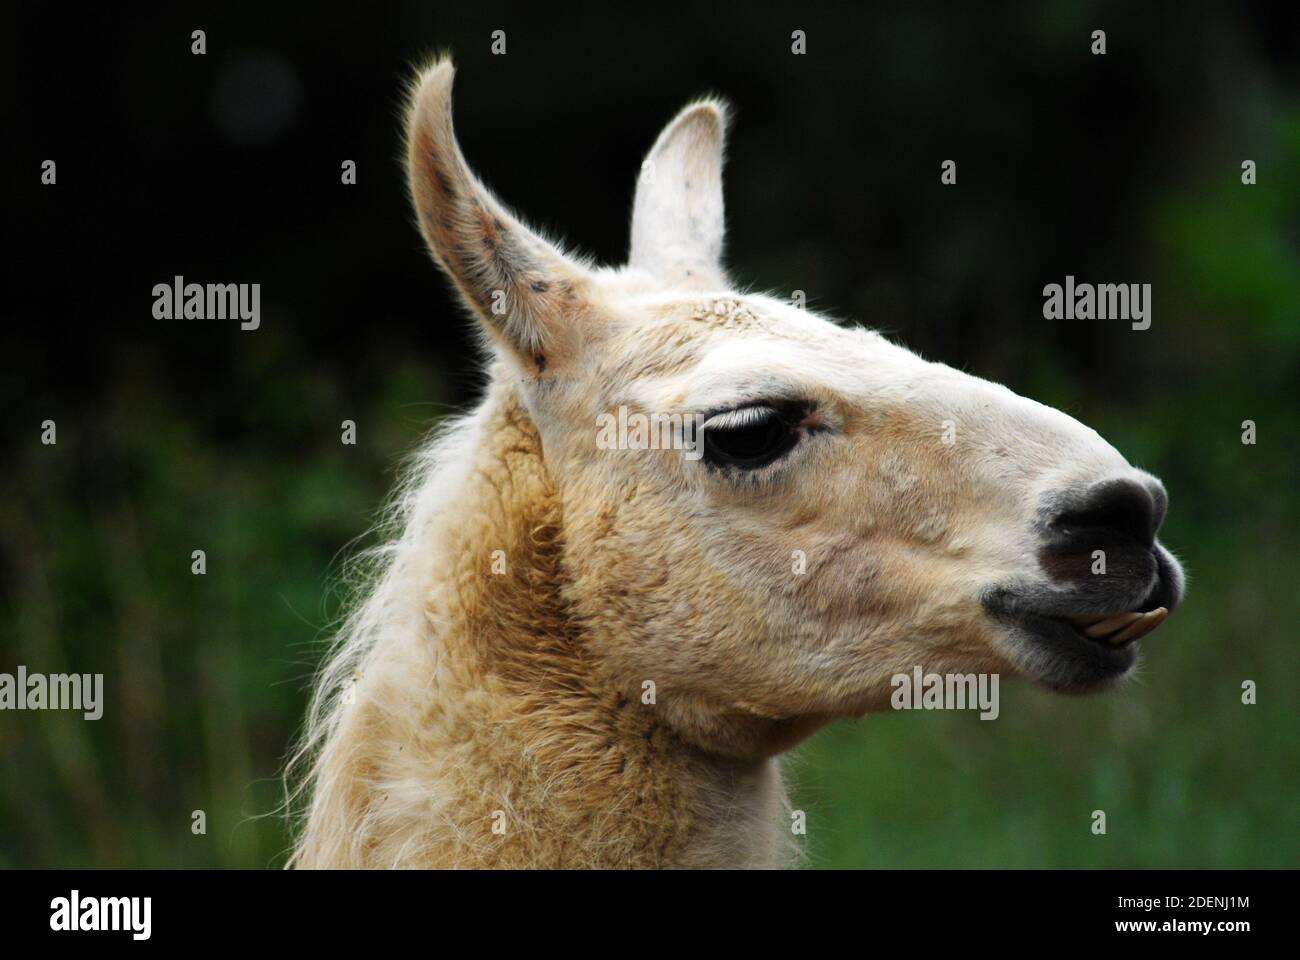 Llama (Lama glama) is a domesticated South American camelid, widely raised for wool, meat, and used as pack animal by South American Andean cultures. Stock Photo